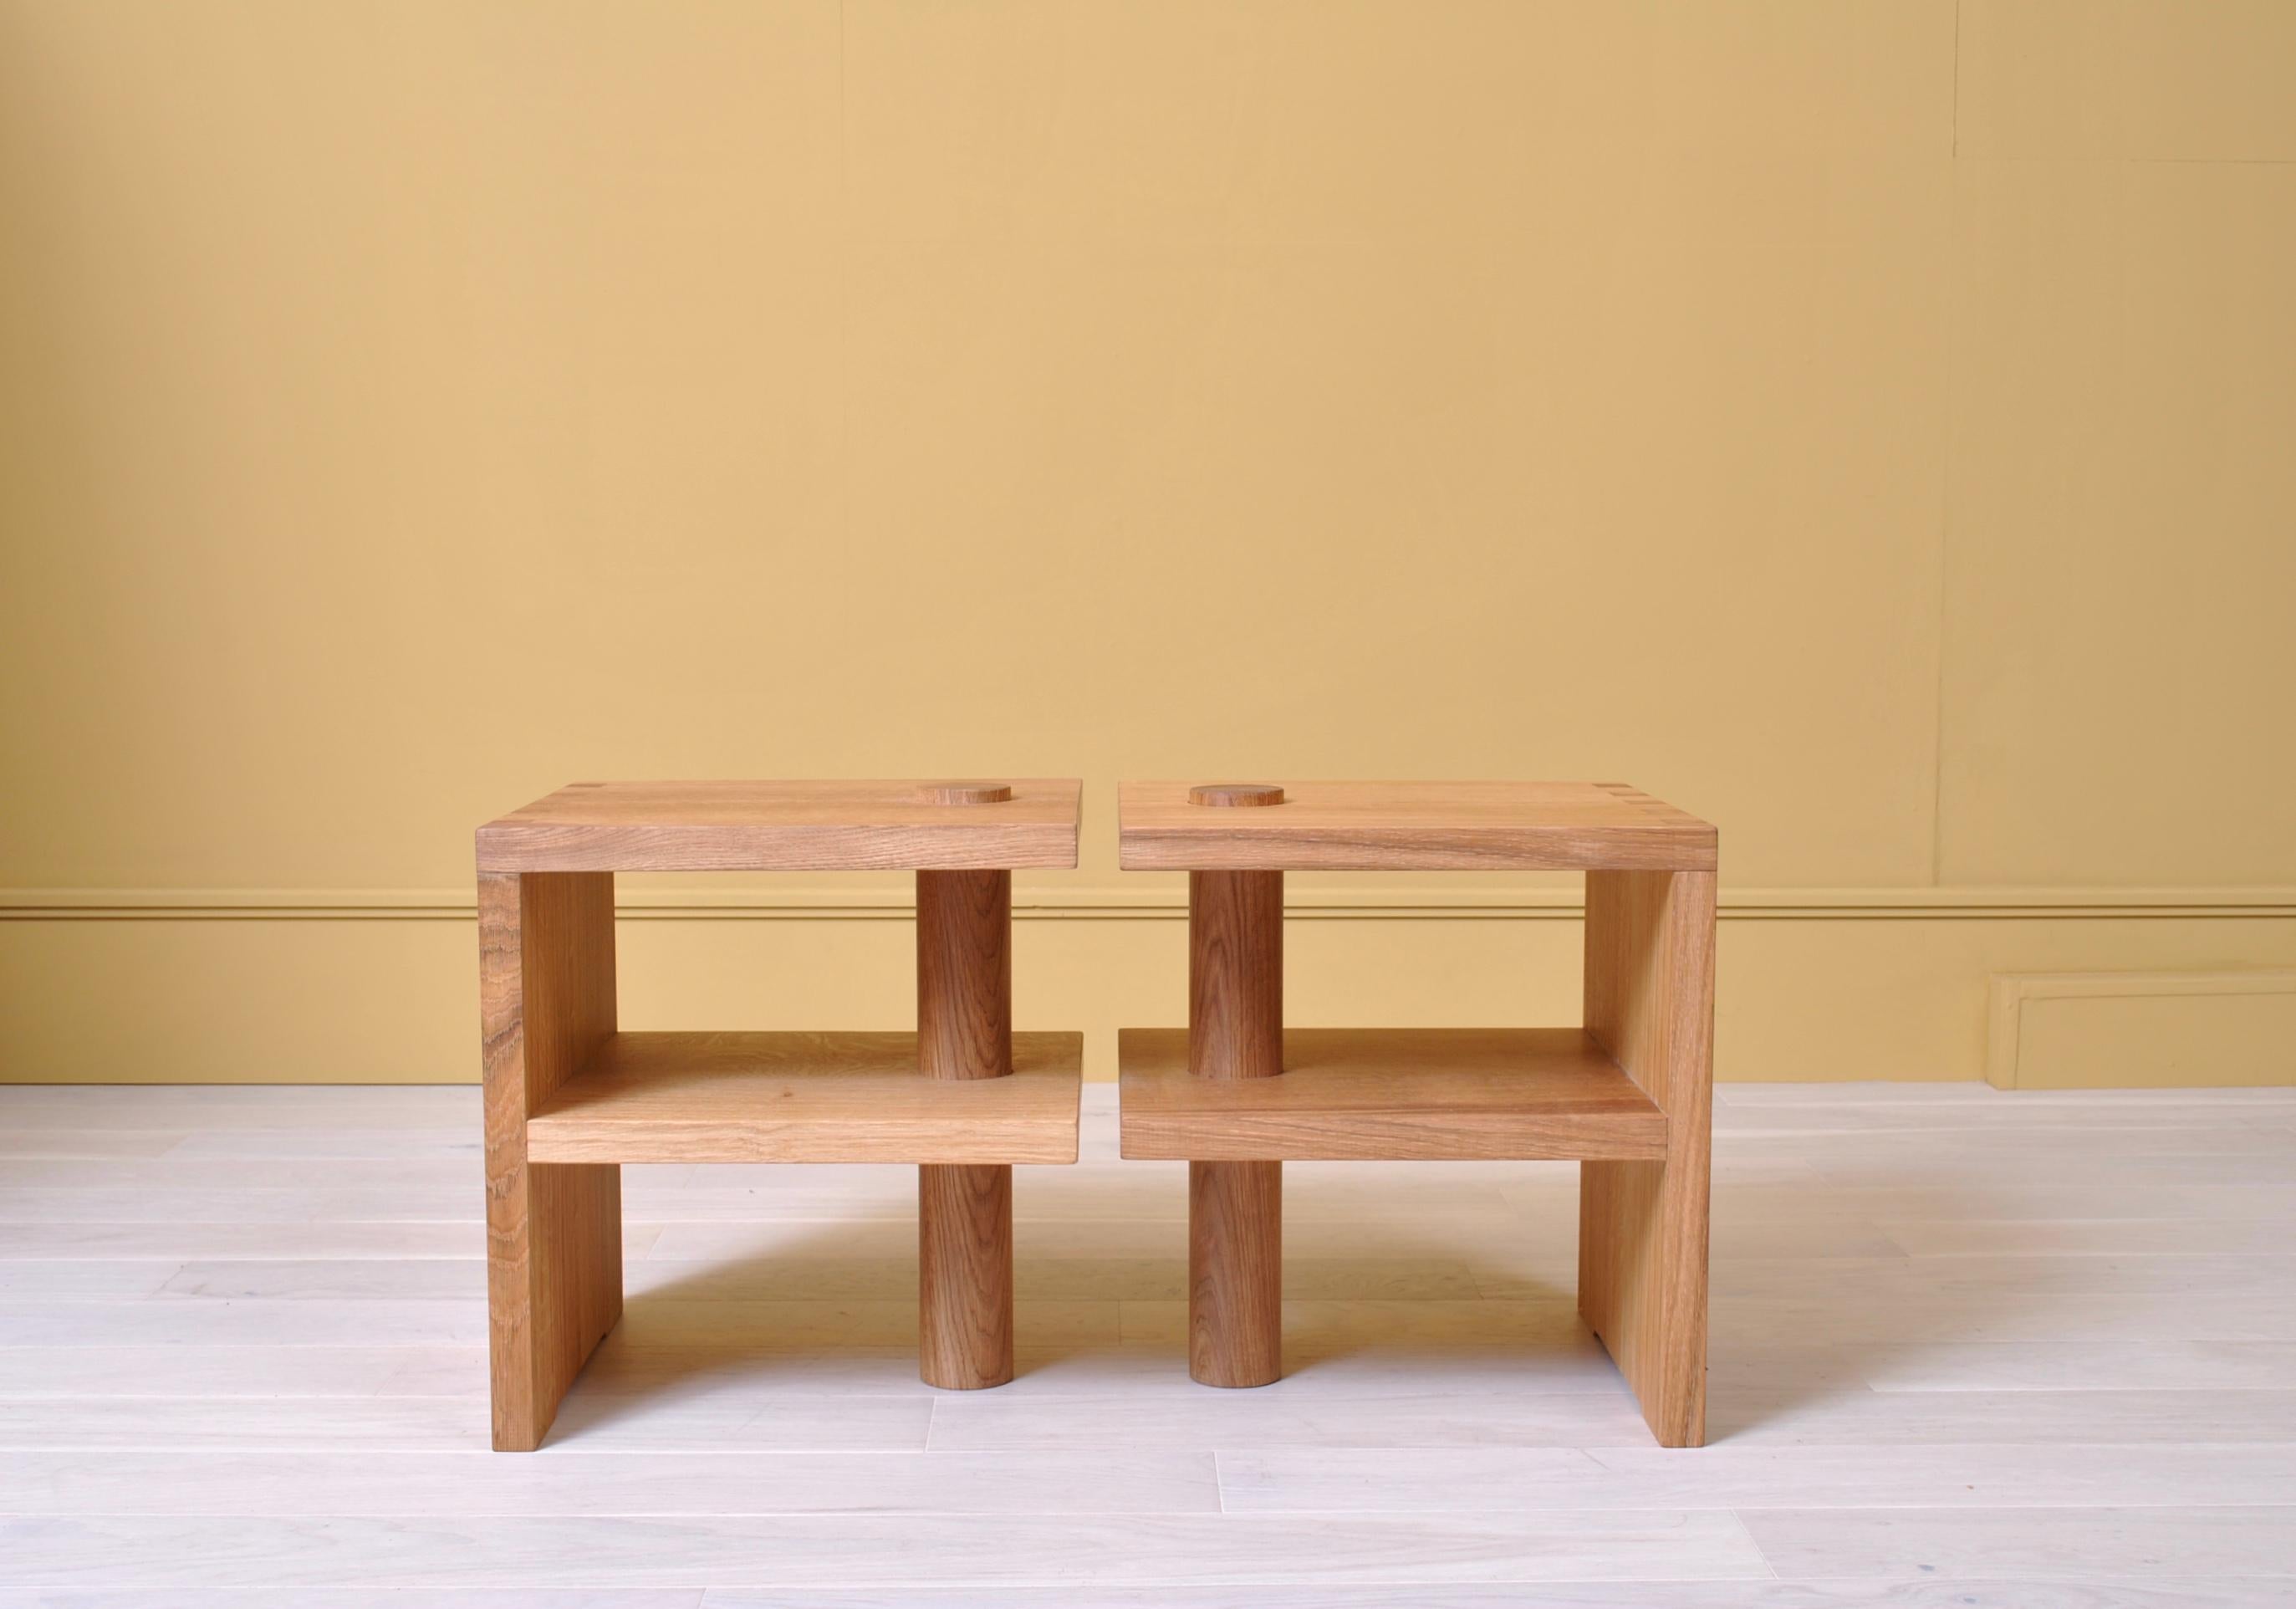 Architectural Postmodern oak pillar stools. Designed by SUM furniture and handcrafted using traditional techniques from fully quarter sawn English oak. handcut dovetail jointing with turned oak upright pillar piercing through the sections. These can